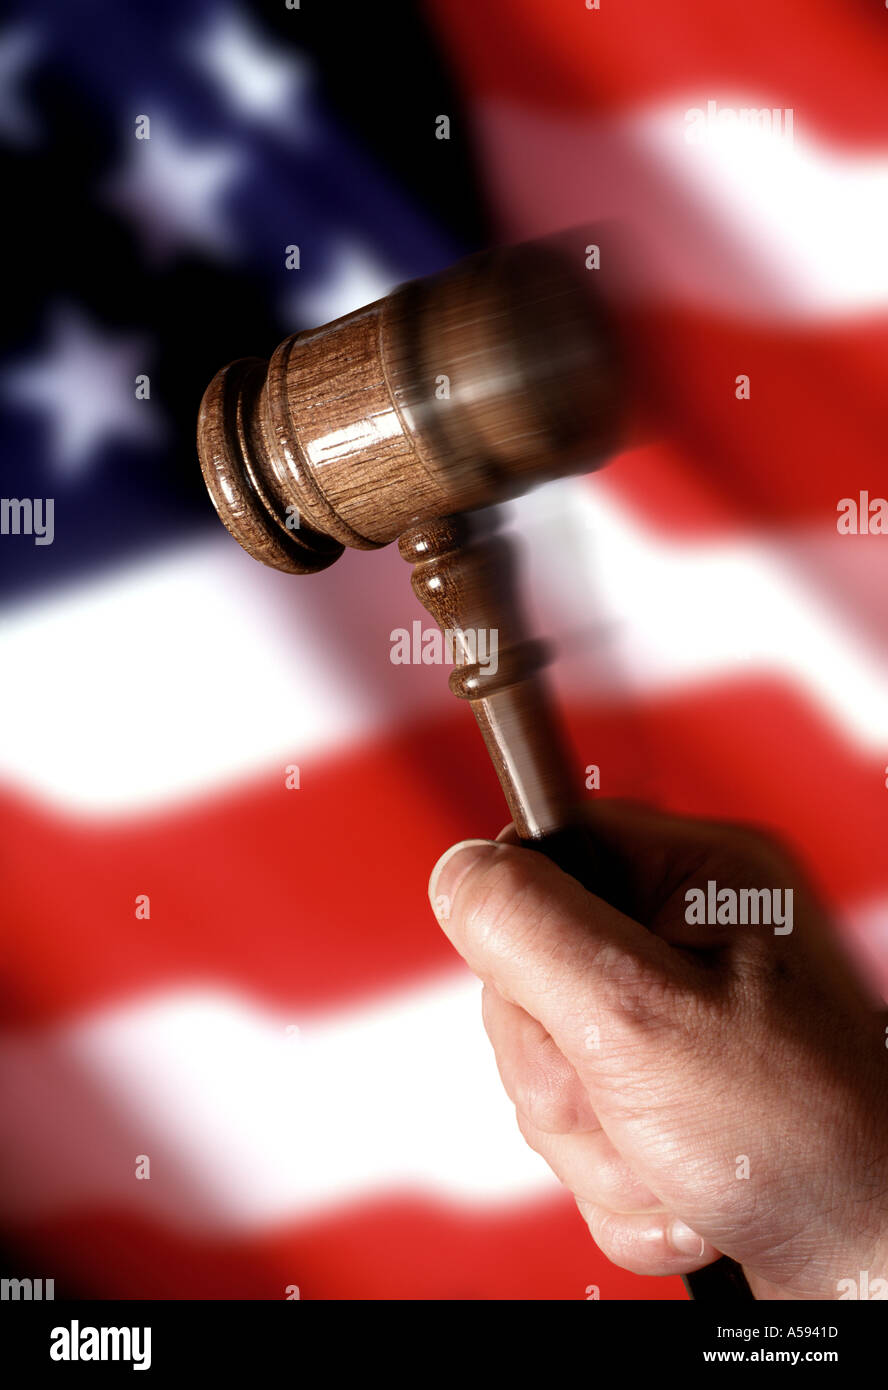 hand moving a gavel with US flag background Stock Photo